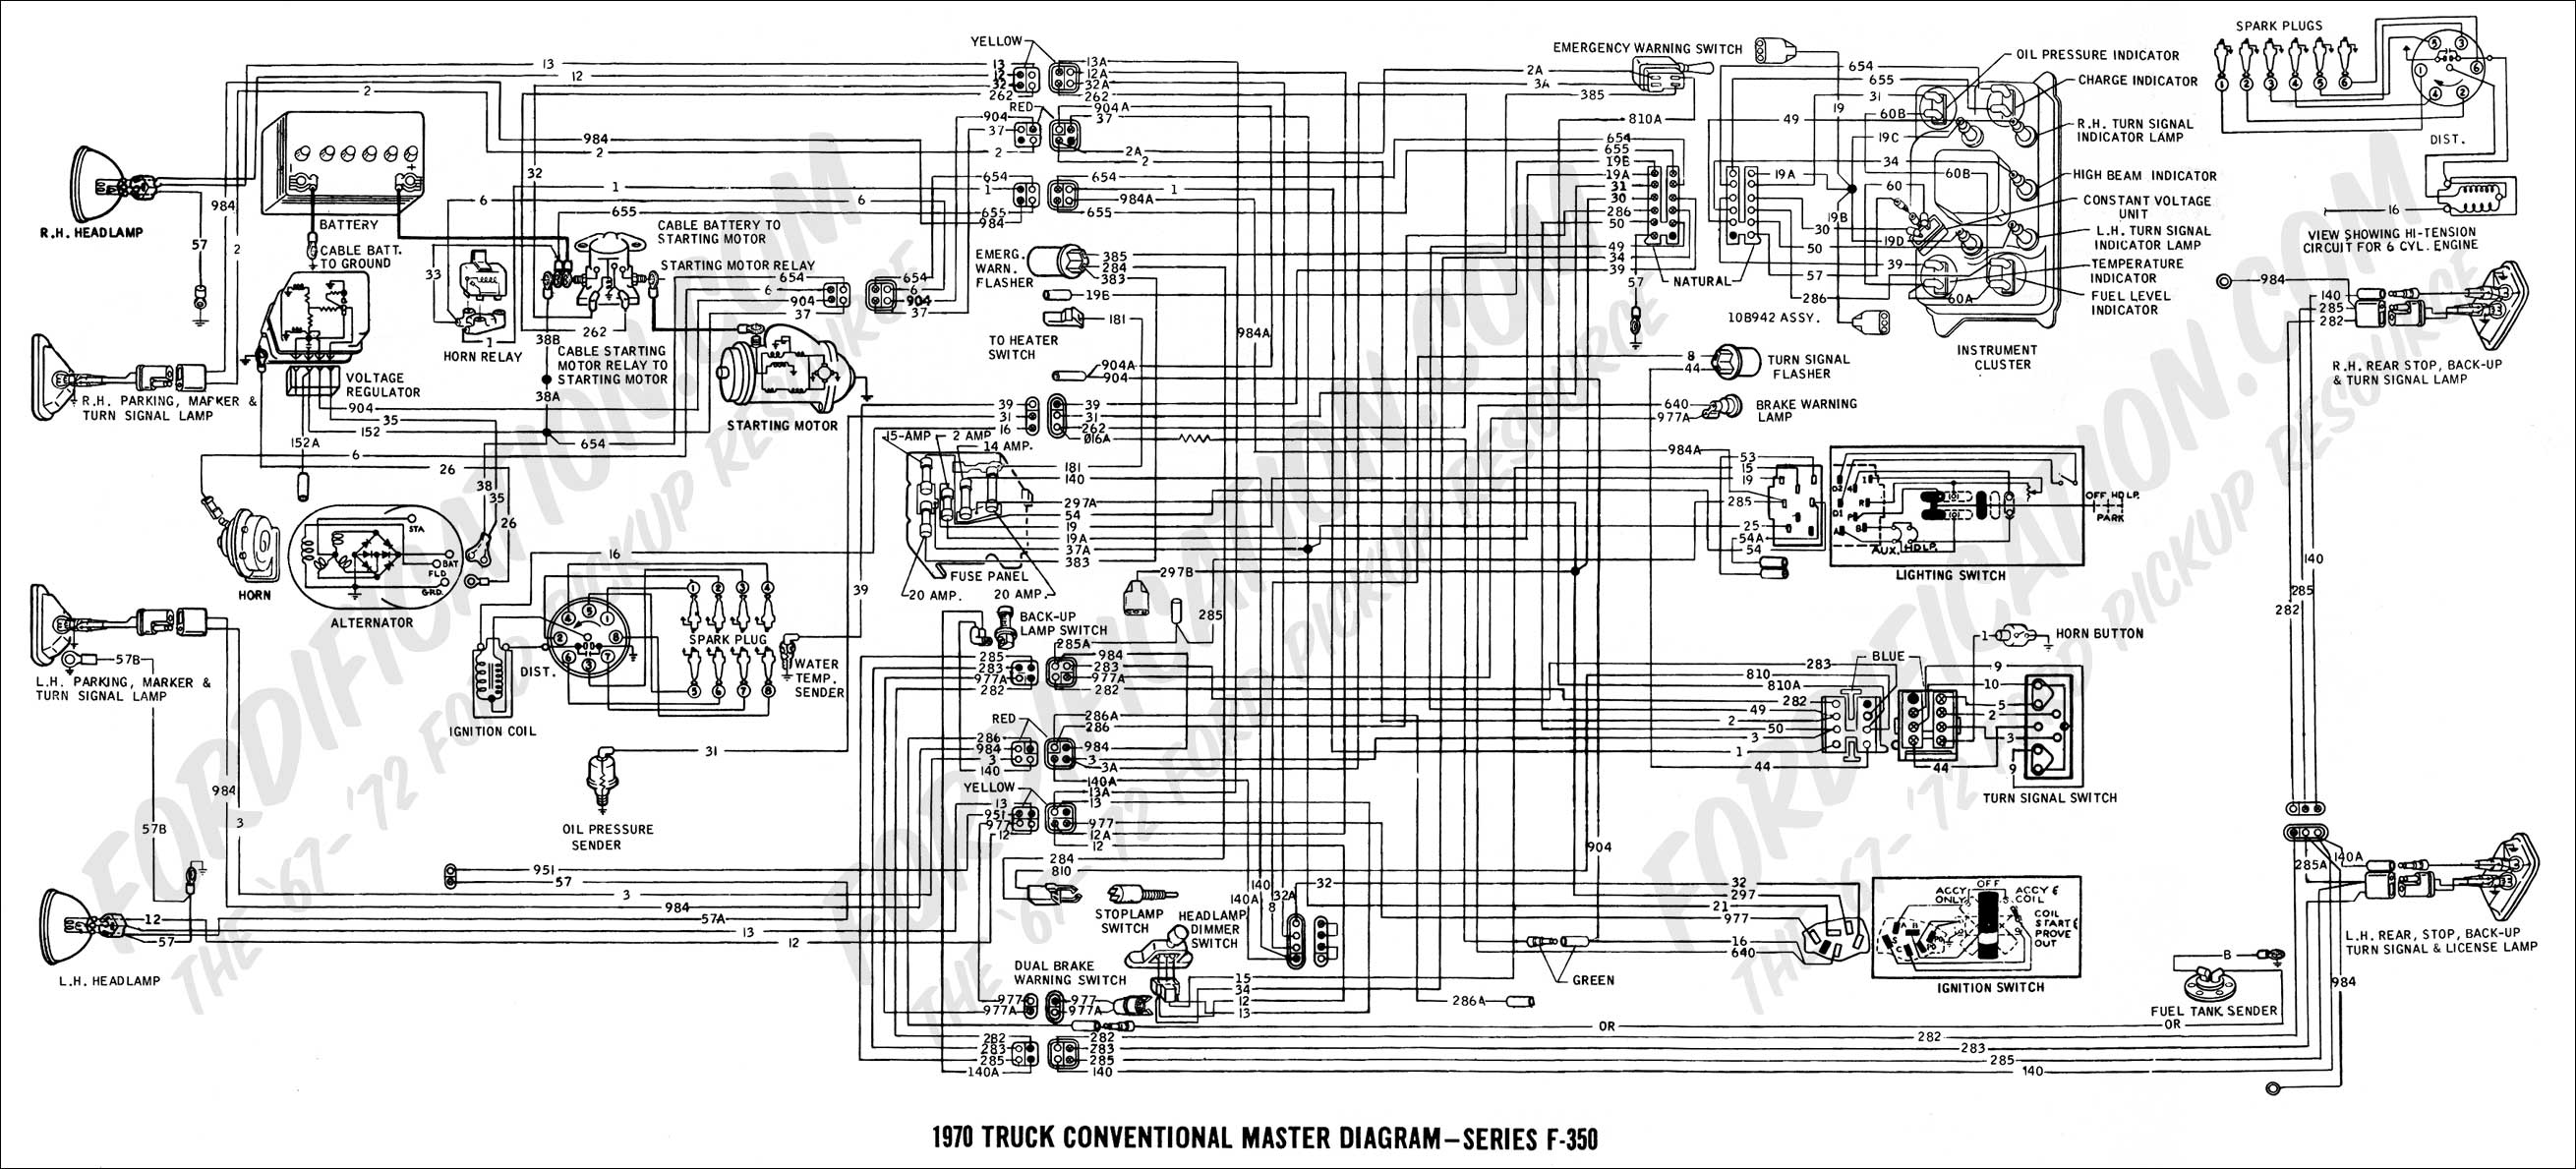 2001 Ford F350 Wiring Diagrams Schematic Wiring Diagram